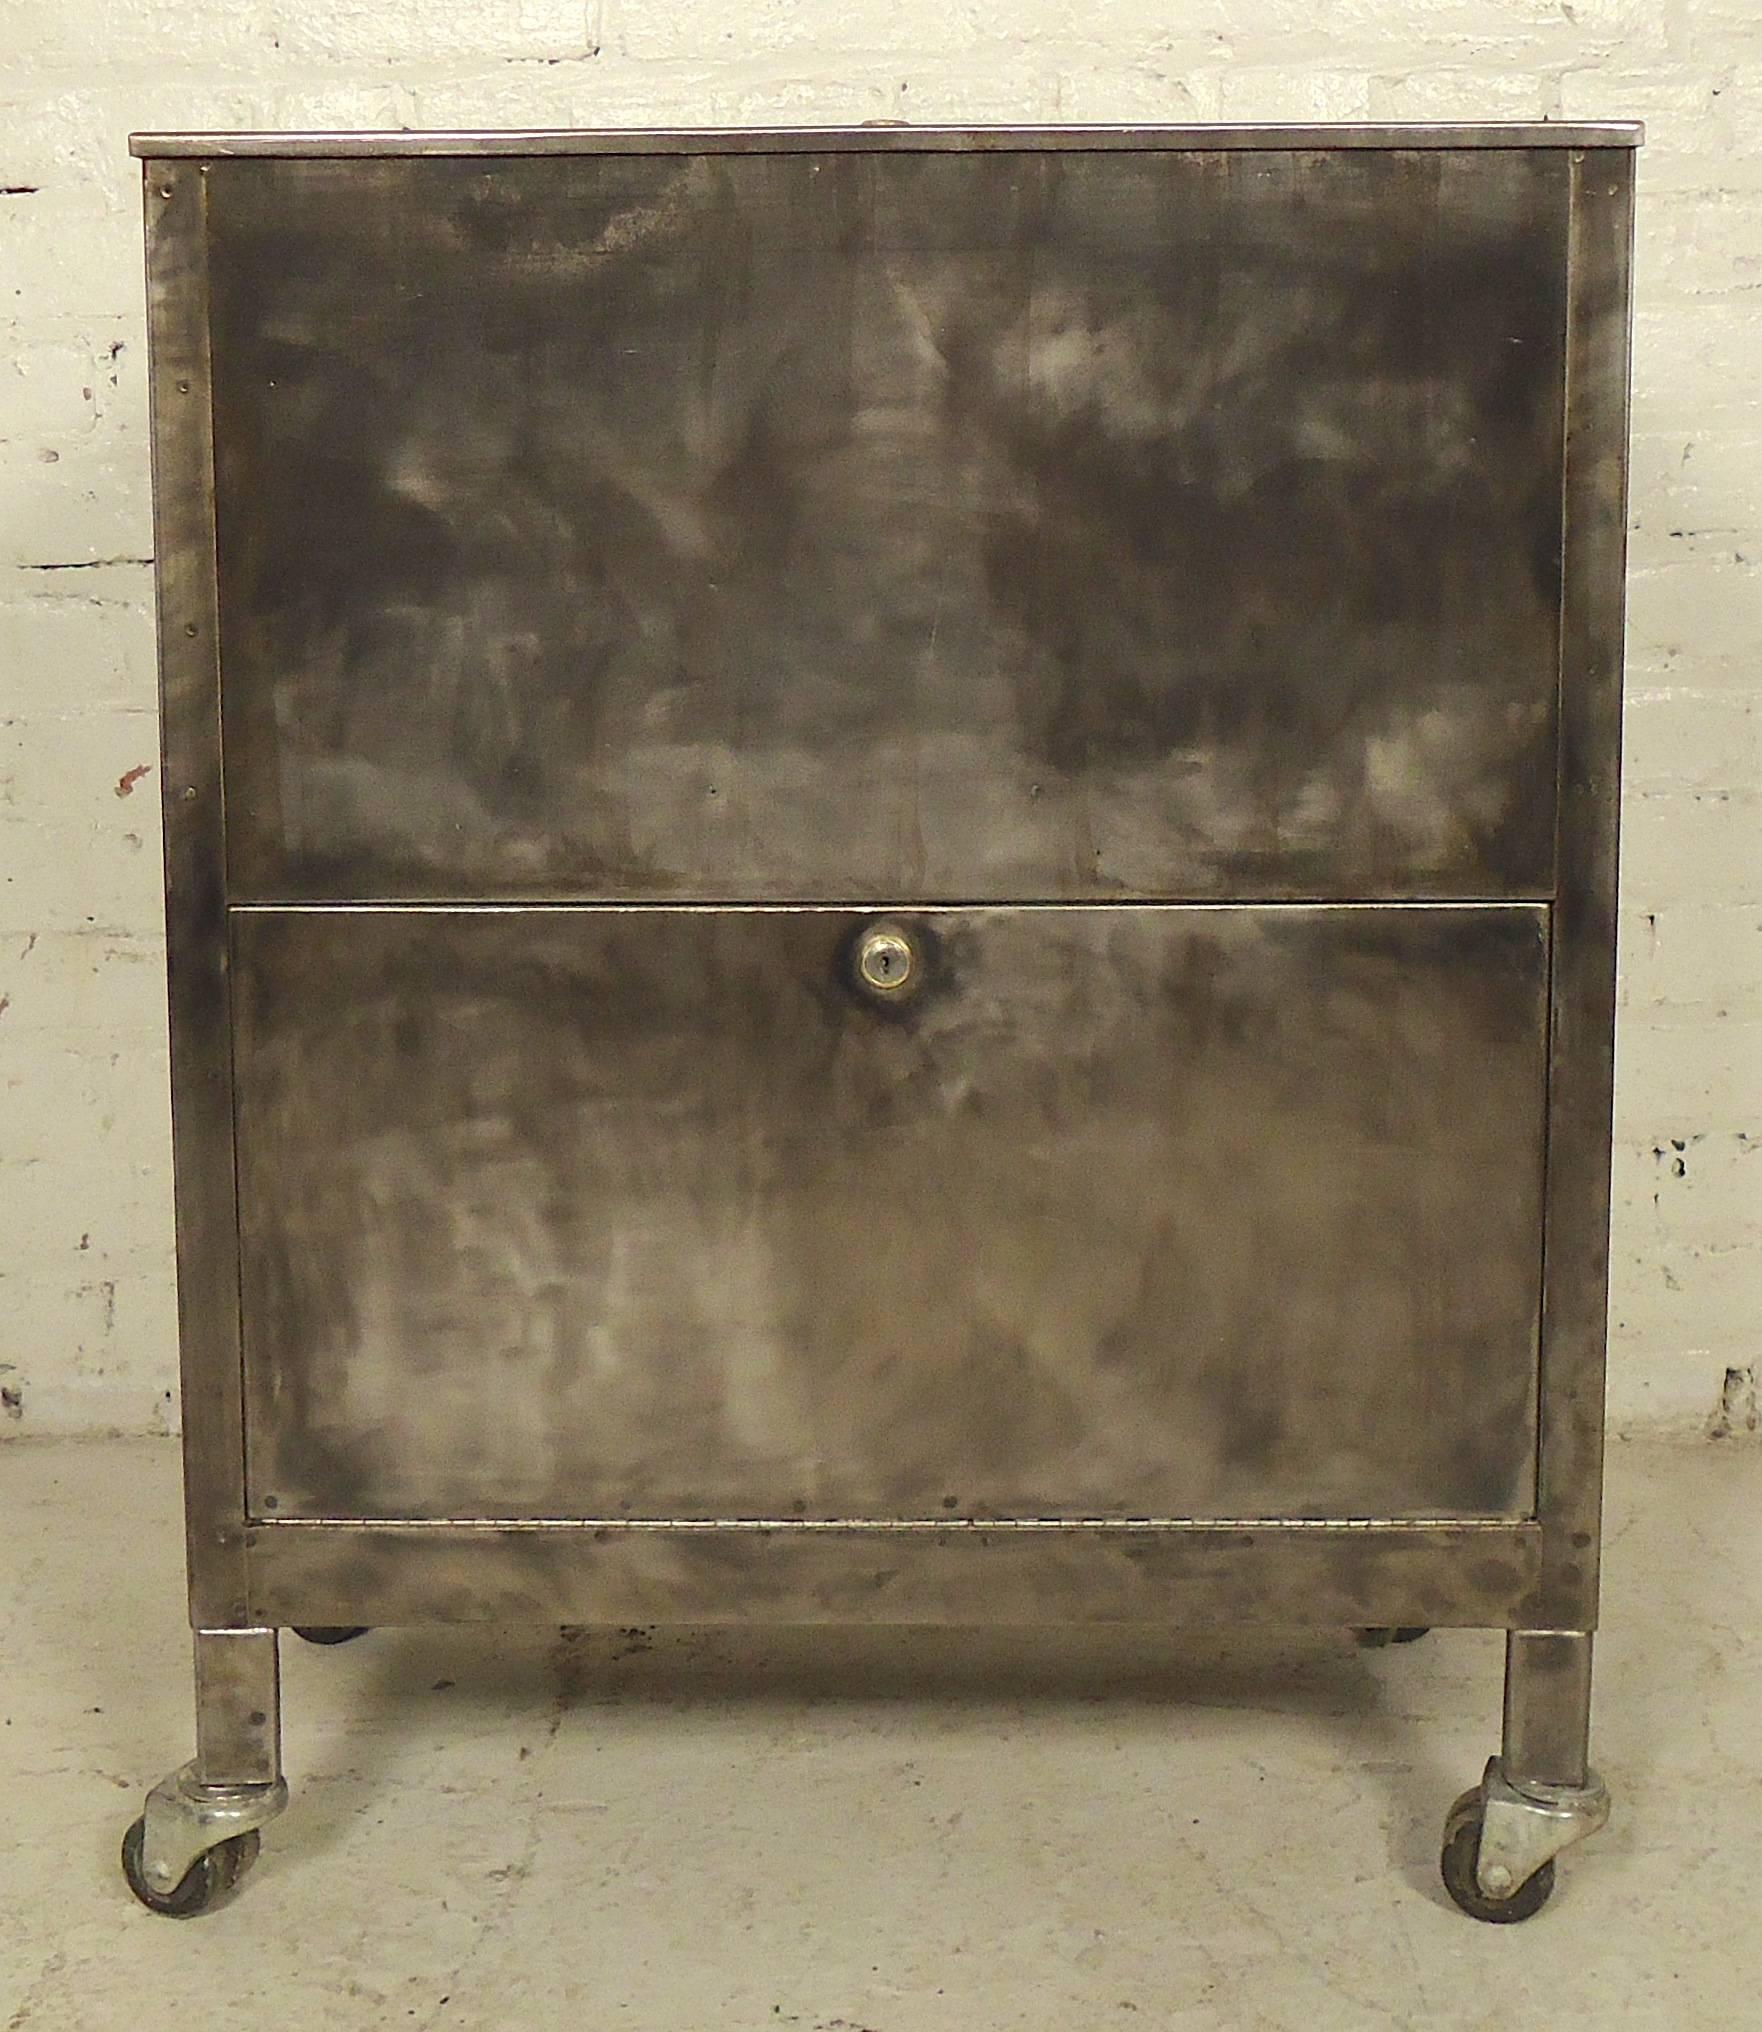 Vintage metal rolling cart with Dual cabinets, refinished in a bare metal style. Could be used as a unique modern dry bar.
Top cabinet: 24